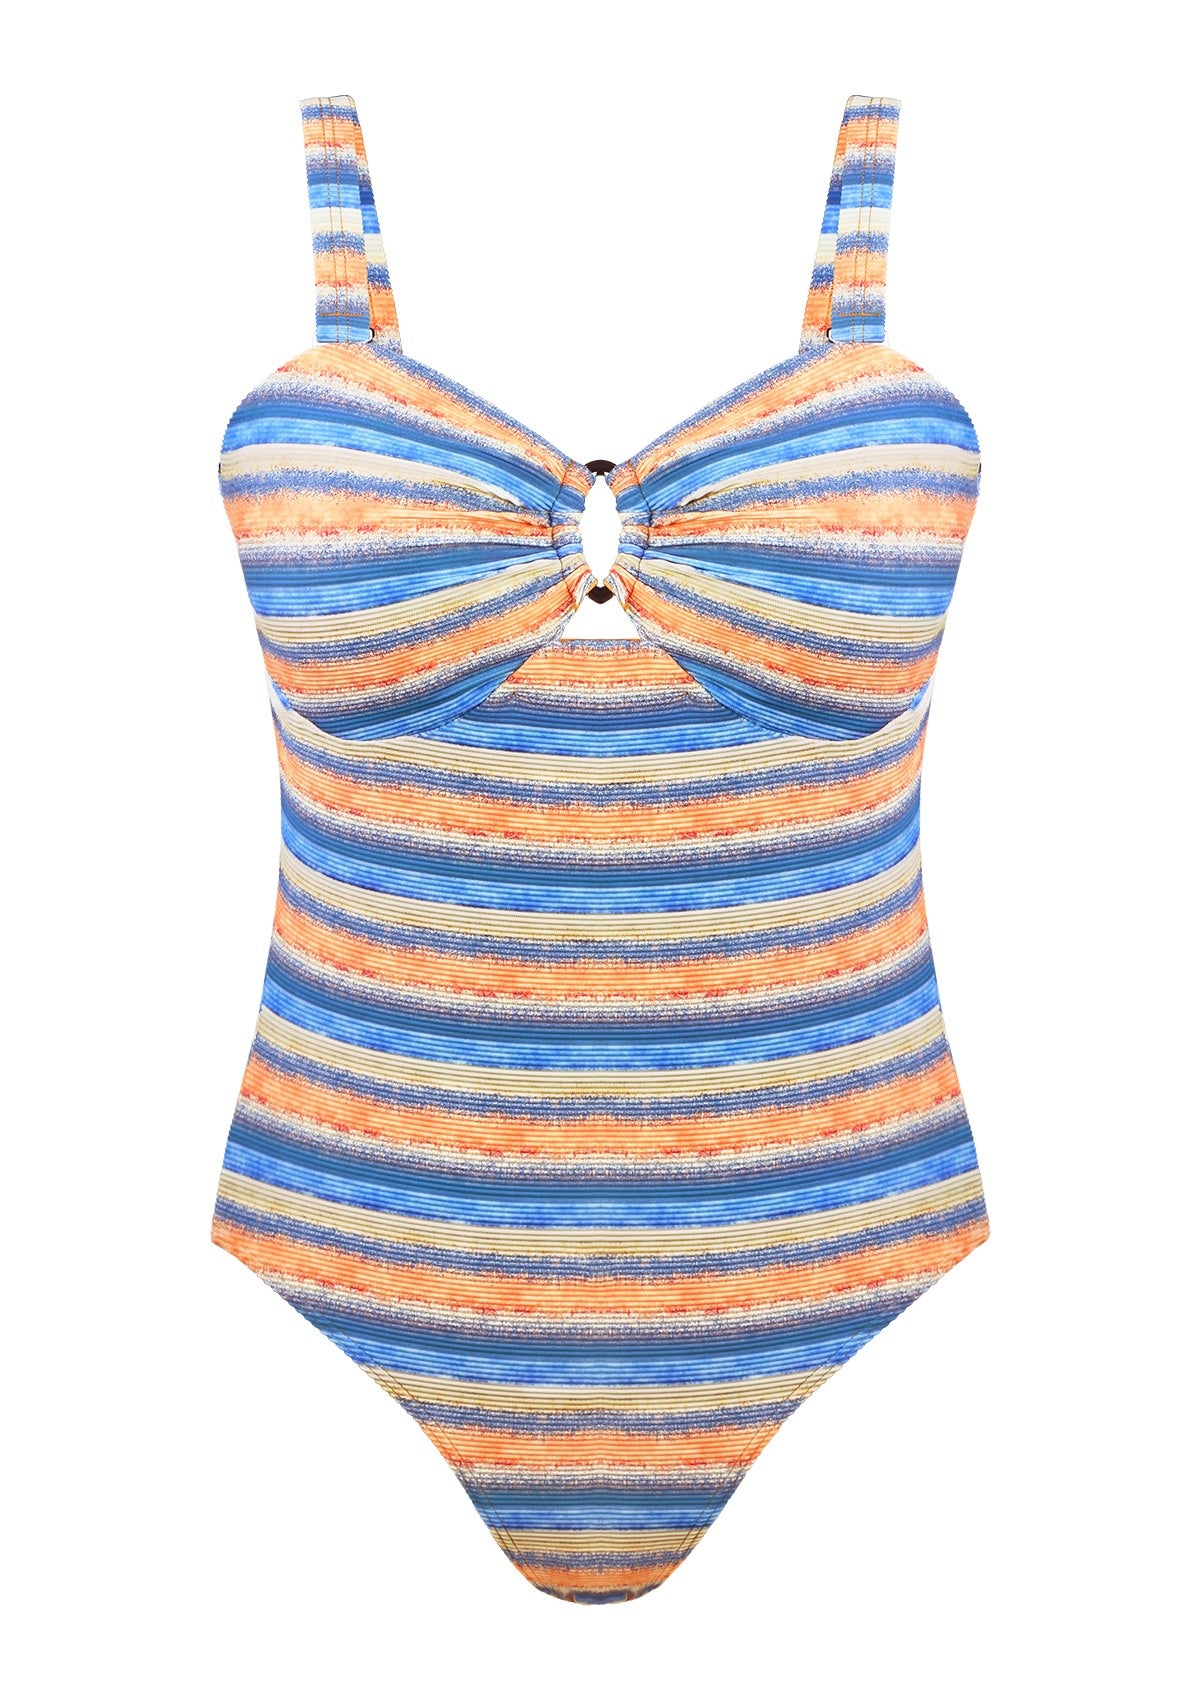 Multiway Multi-colored Striped One-piece Swimsuit - XL / Multi Colored Stripes